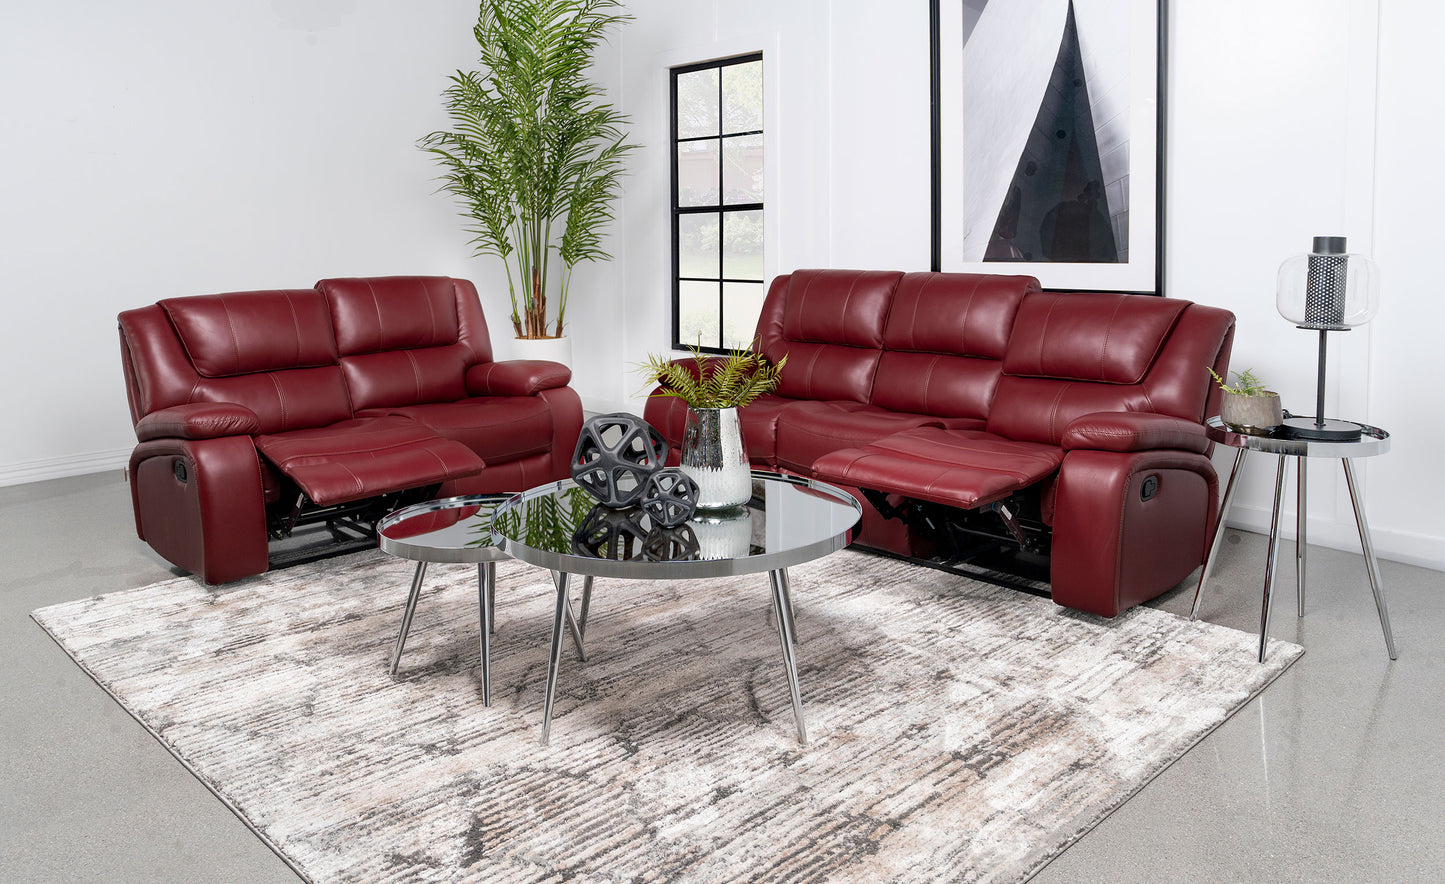 Camila 2-piece Upholstered Reclining Sofa Set Red Faux Leather